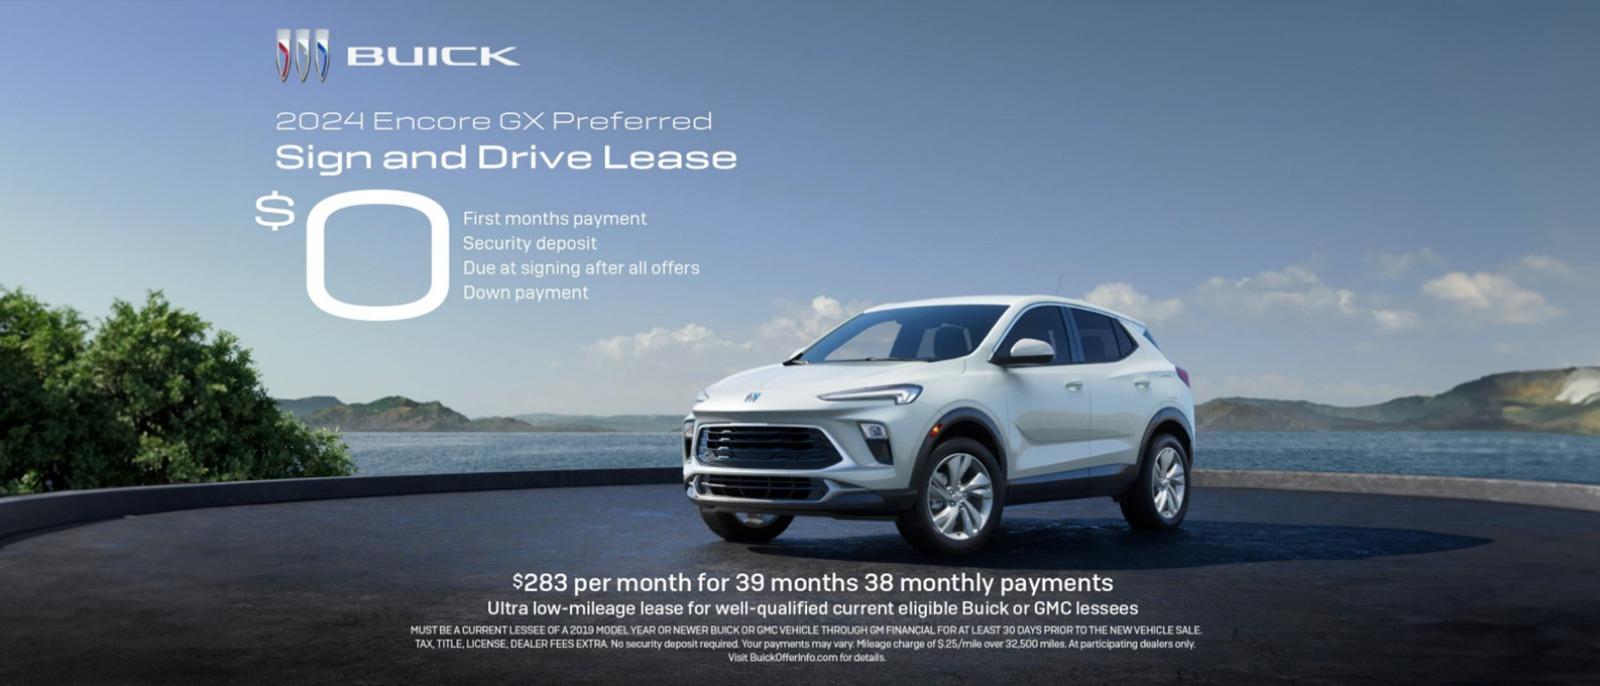 2024 Encore GX preferred sign and drive lease